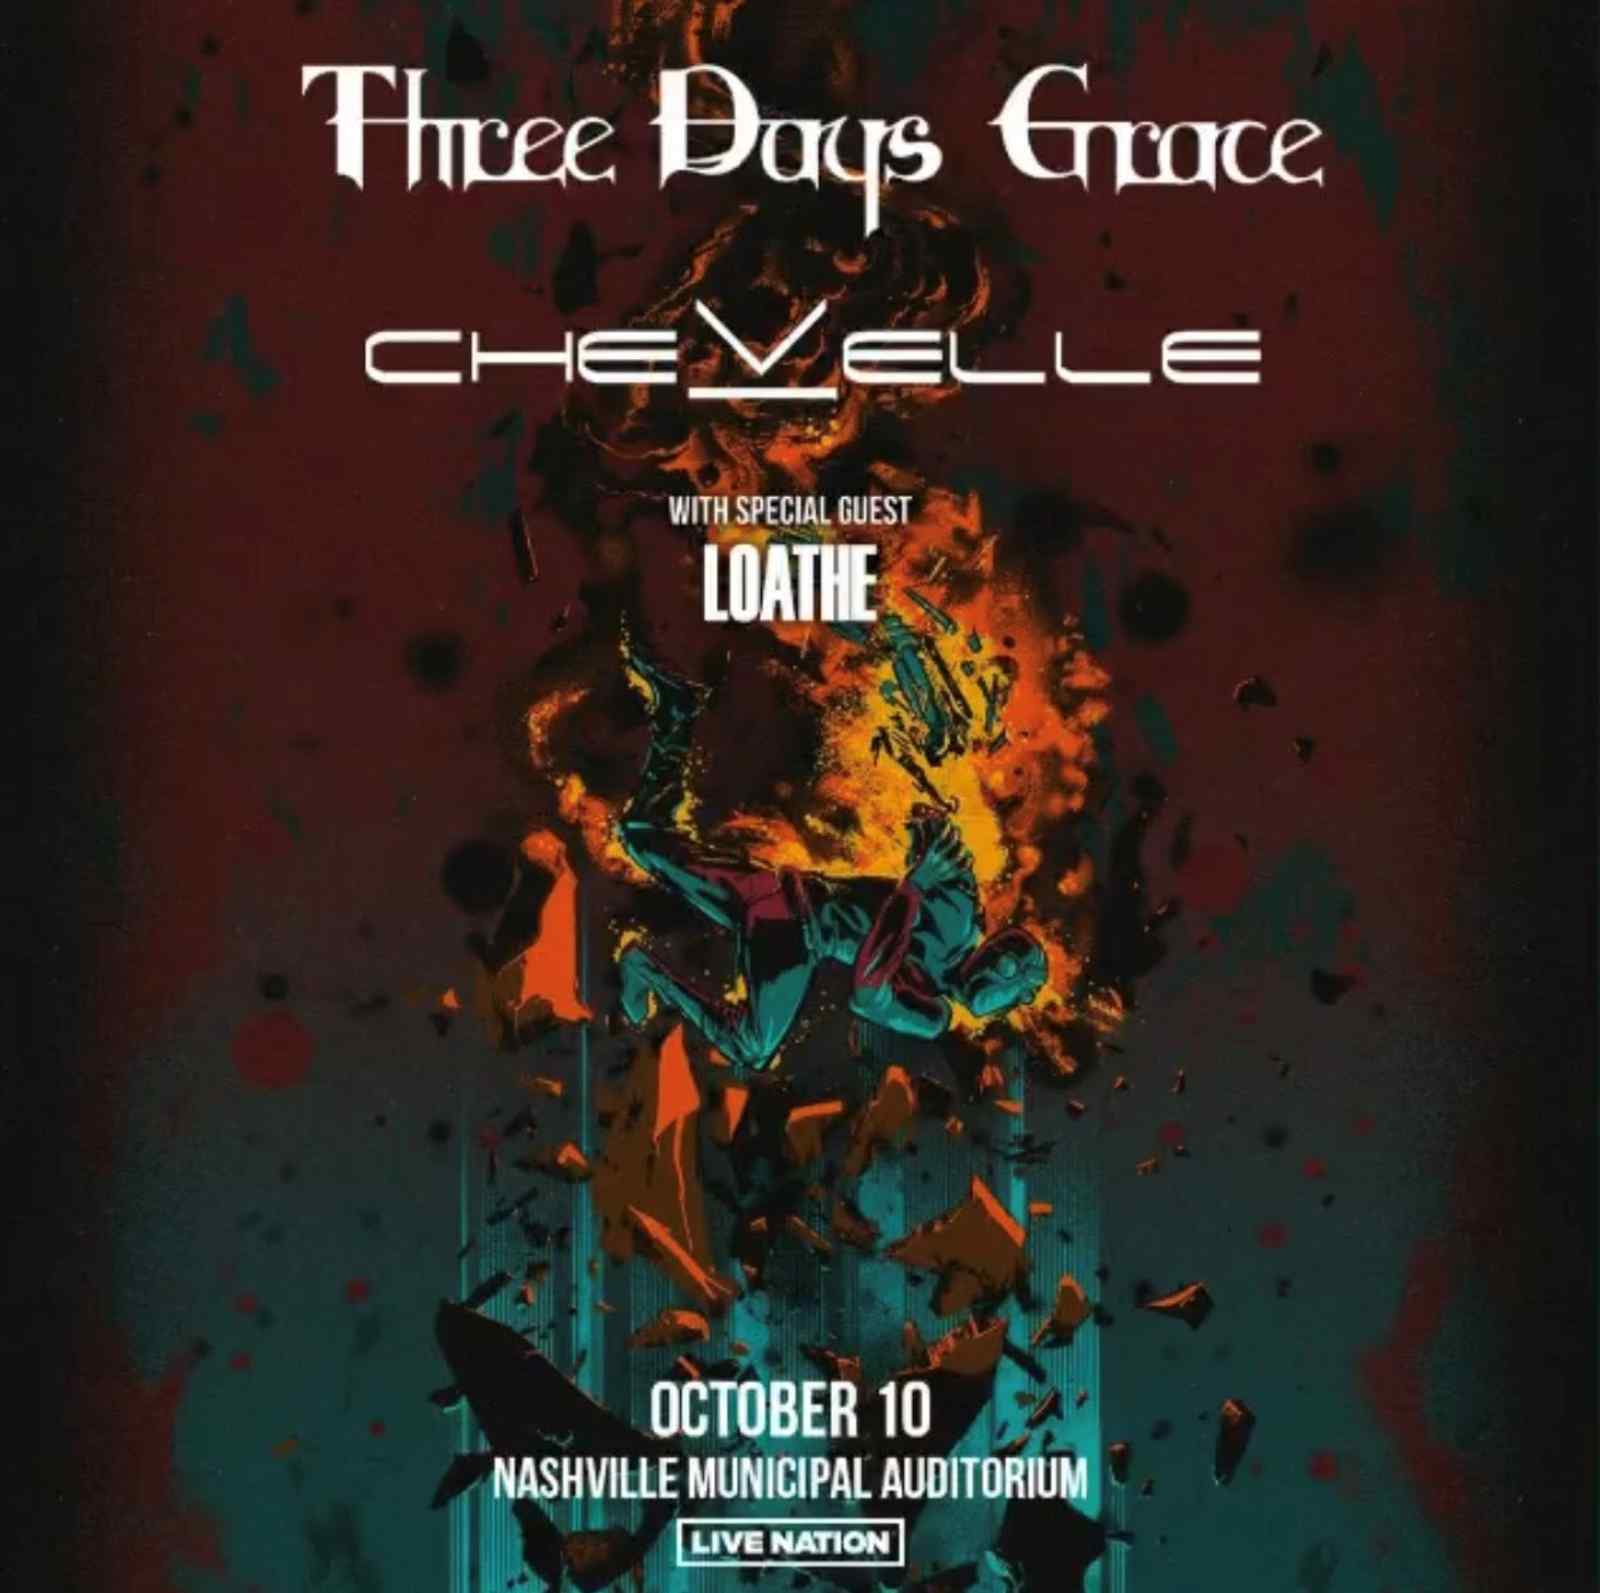 Three Days Grace and Chevelle